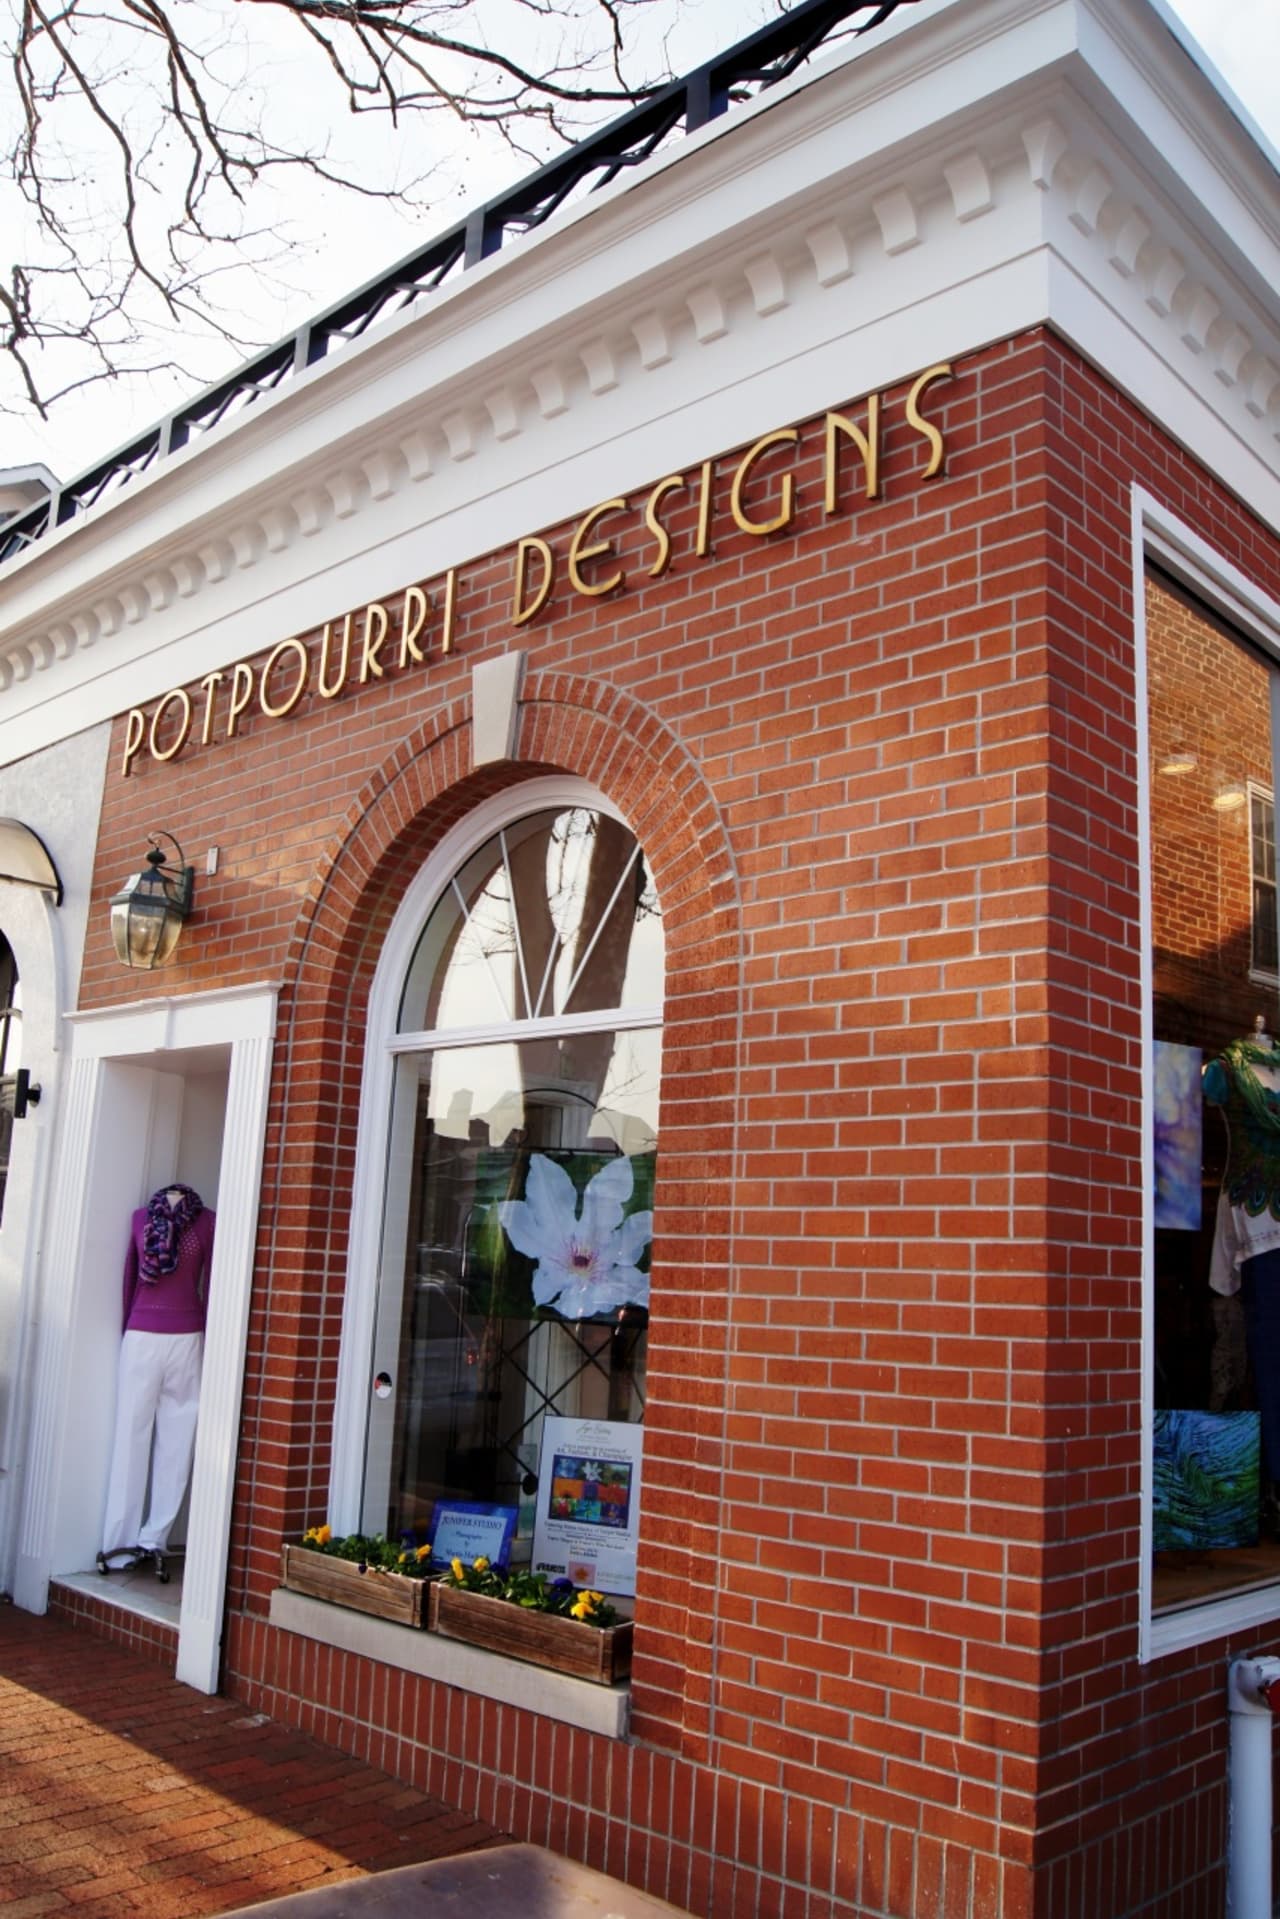 The one-day art and fashion shopping spree will be March 31 at Lyn Evans Potpourri Designs.